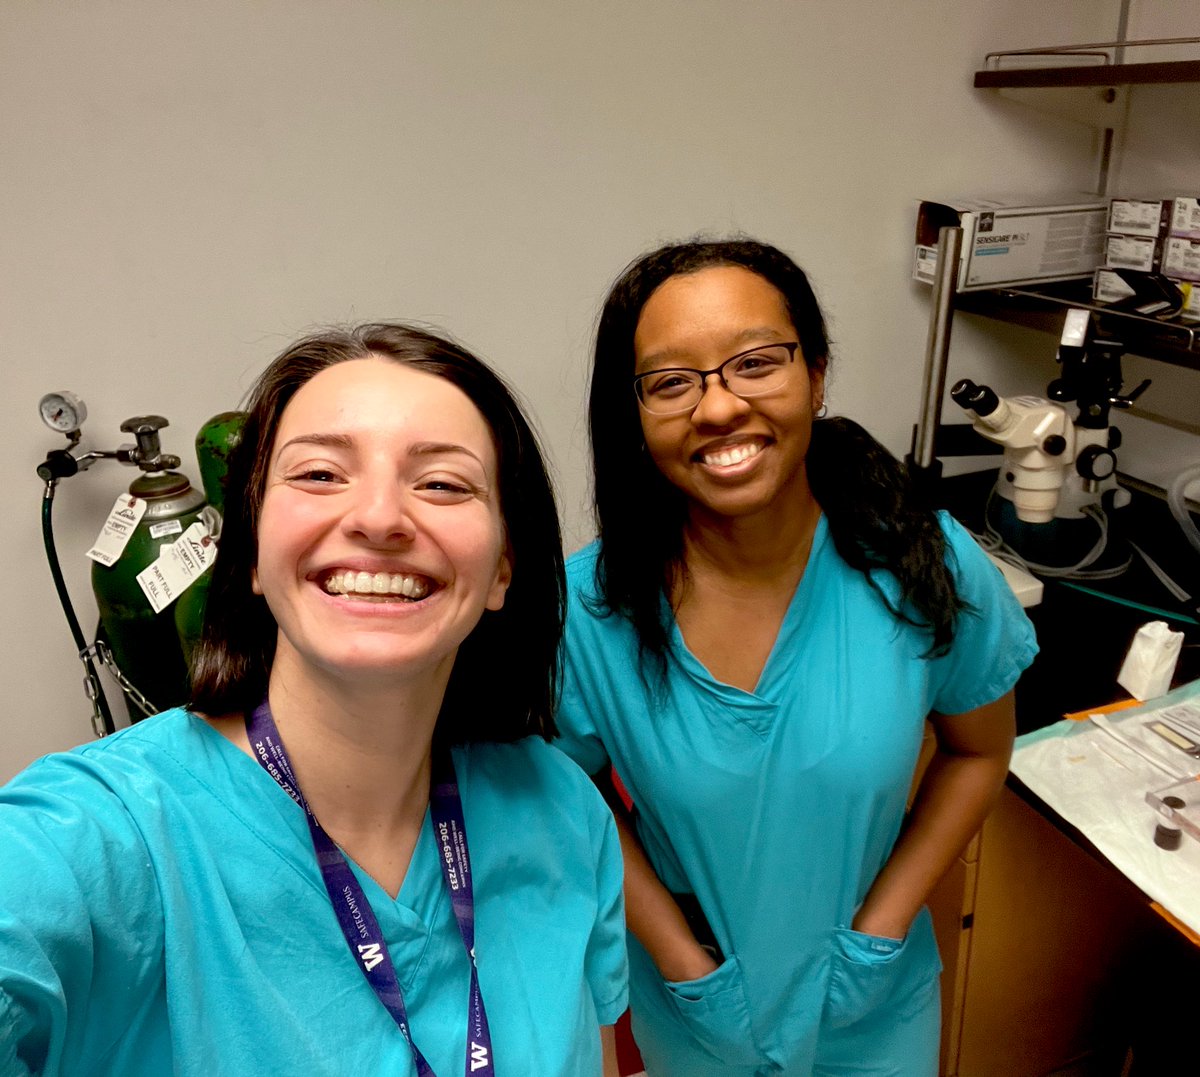 Just two #WomenInScience on #International_Womens_Day, working on the efficacy study with Medusa cells! Will the NCX1 removal be detrimental for our cardiac regenerative cell therapy? We’re accepting bets!!! #celltherapy #cardiacregeneration